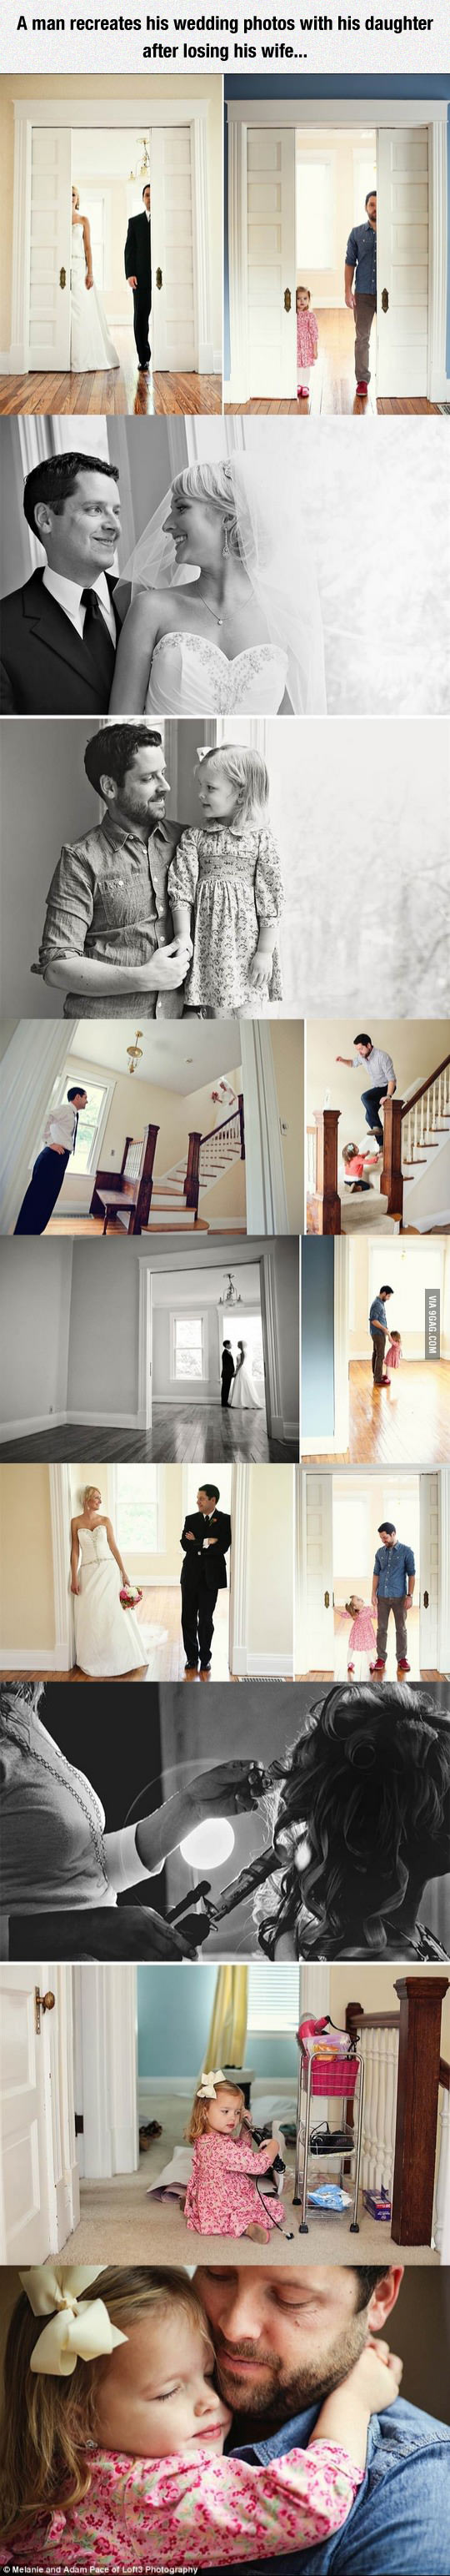 room - A man recreates his wedding photos with his daughter after losing his wife... drill Via 9GAG.Com Melanie and Adam Pace of Lofts Photography